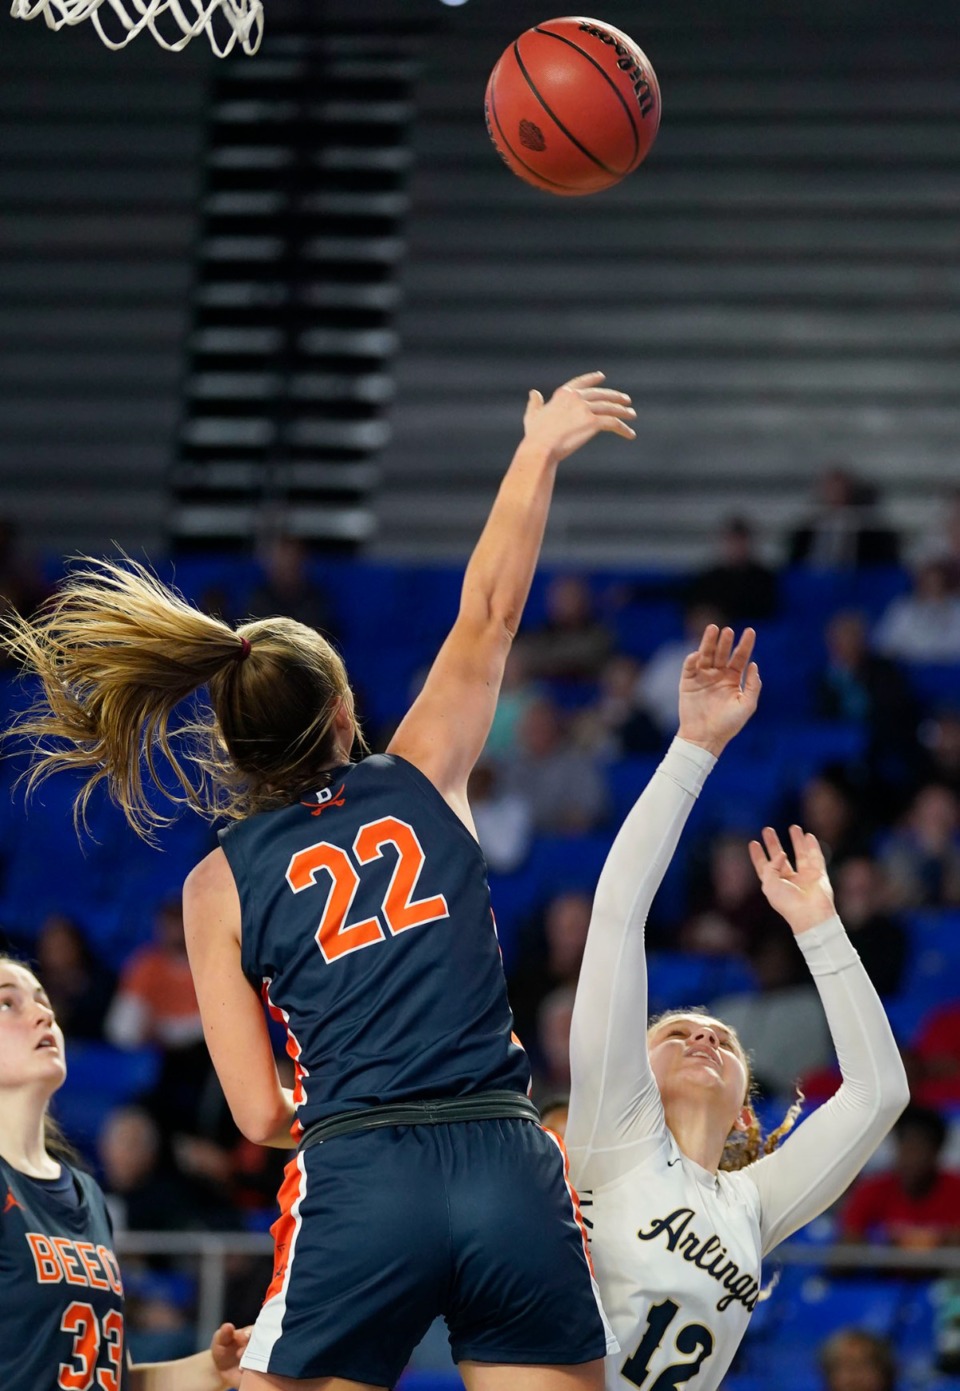 <strong>Beech&rsquo;s Riley Long (22) blocks a shot by Arlington&rsquo;s Alindsey Long (12) during the Division I, Class 4A game on Wednesday March 9, in Murfreesboro.</strong>&nbsp;(Mark Weber/The Daily Memphian)